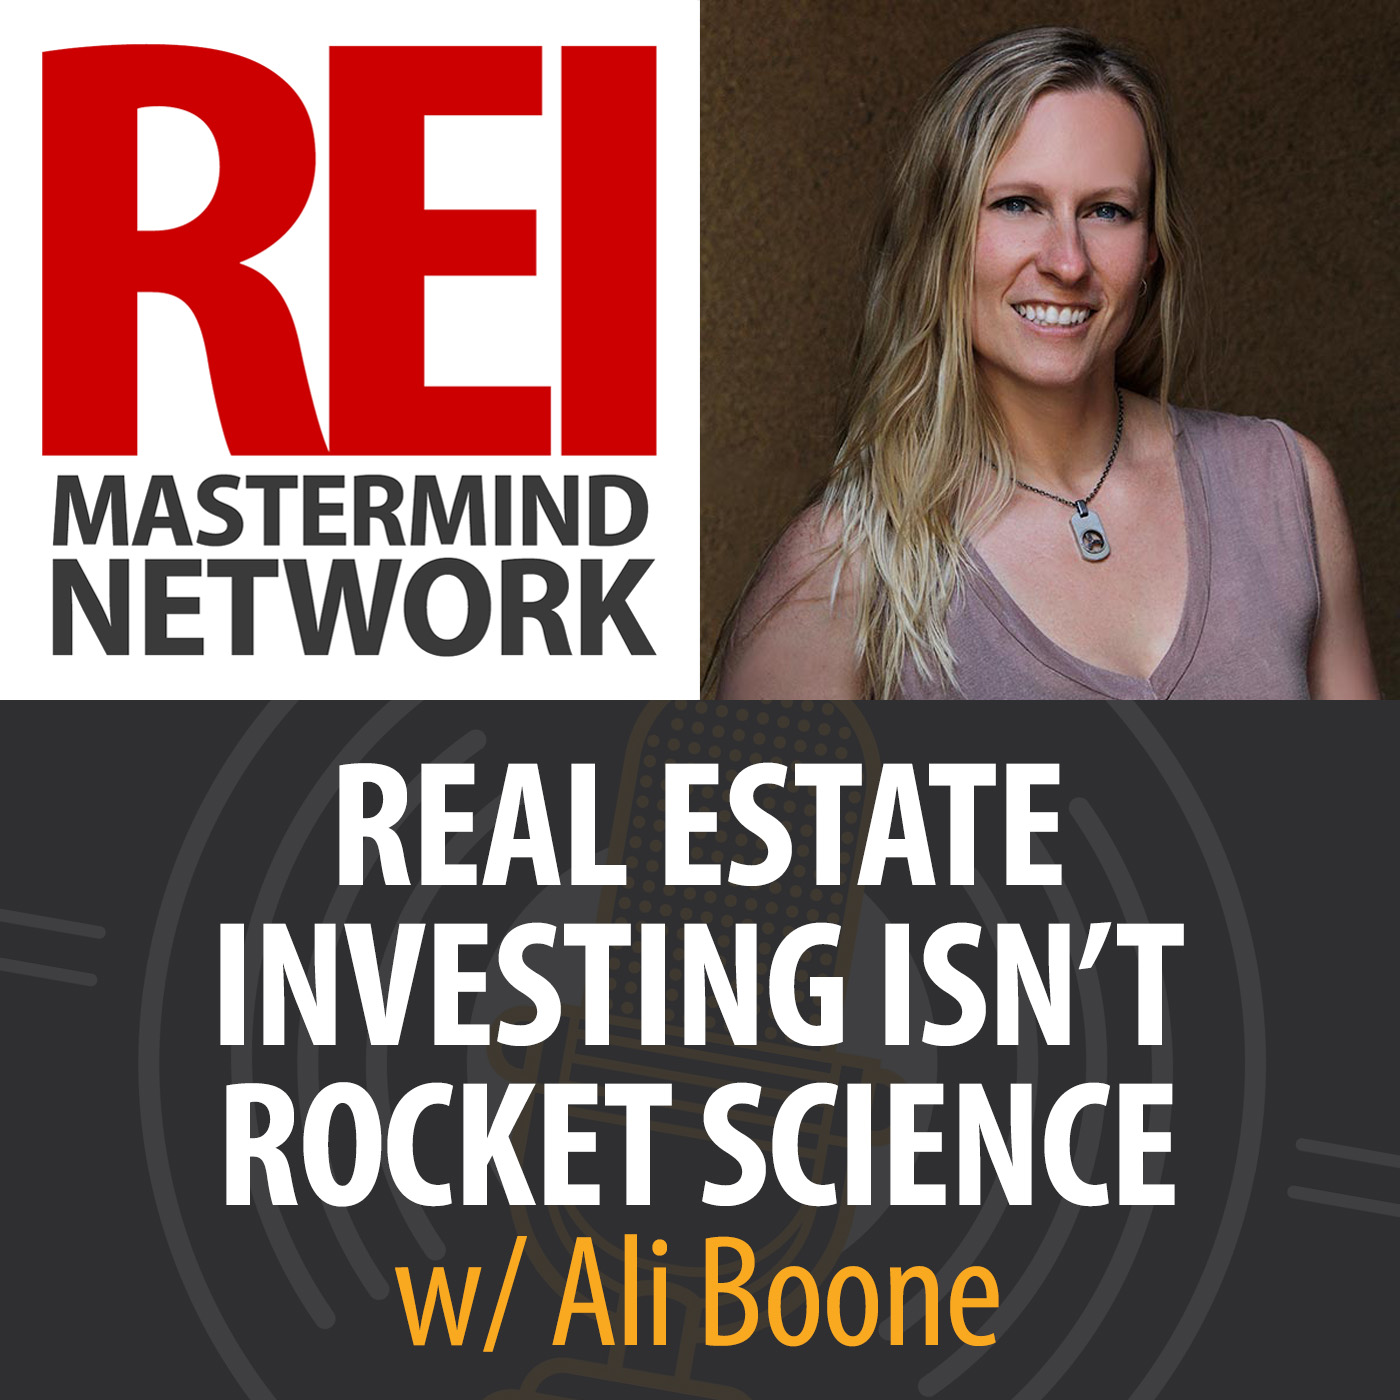 Real Estate Investing Isn't Rocket Science with Ali Boone Image